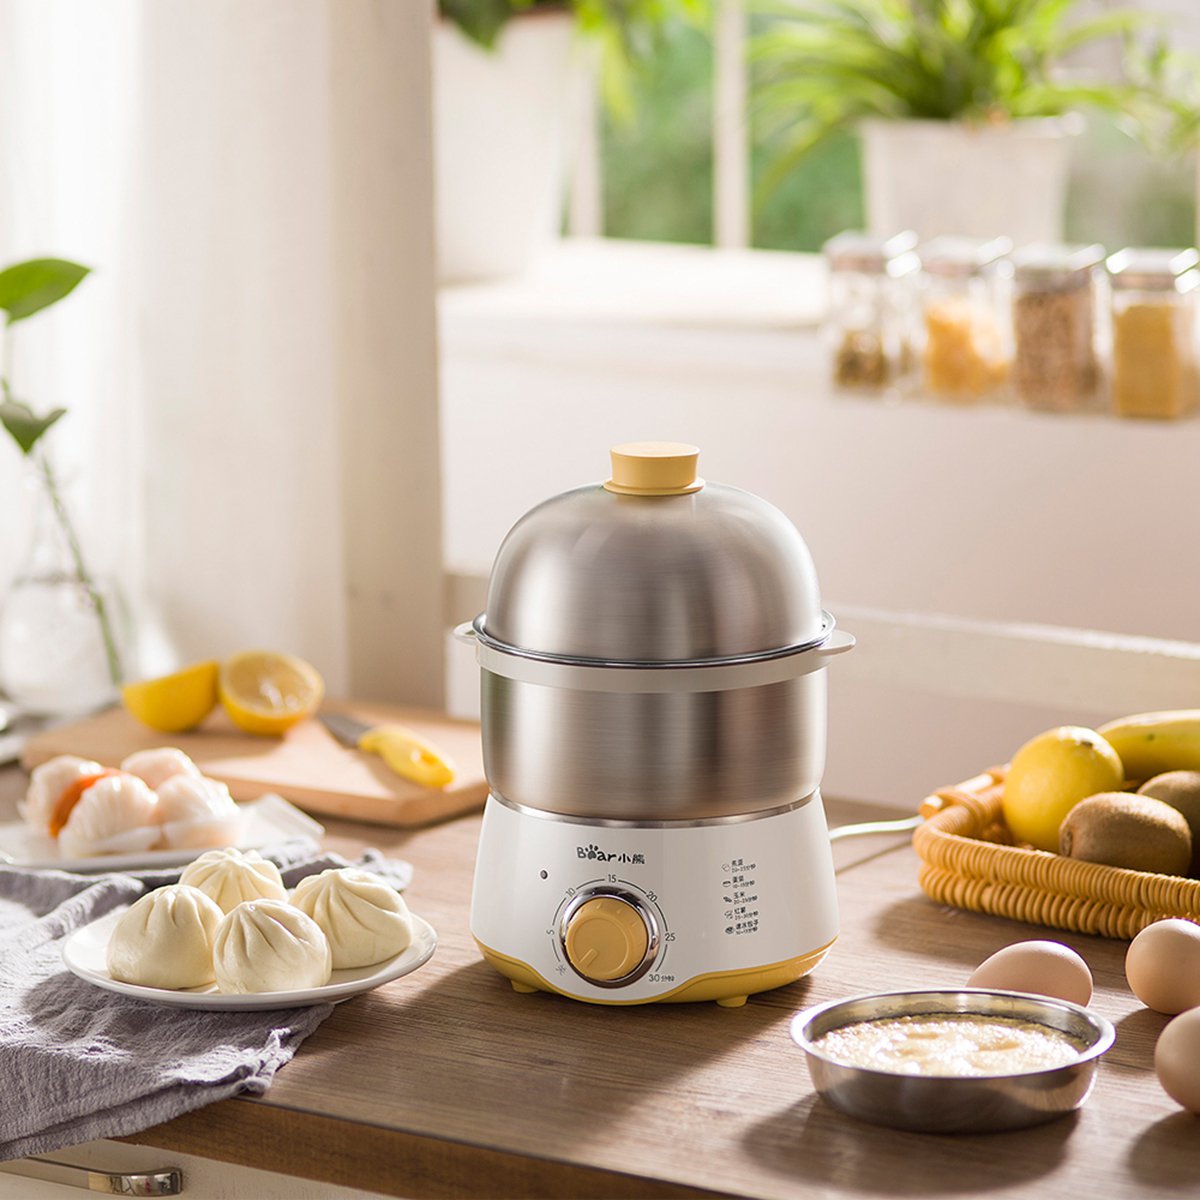 Hastings Home Multi-Function Electric Egg Cooker